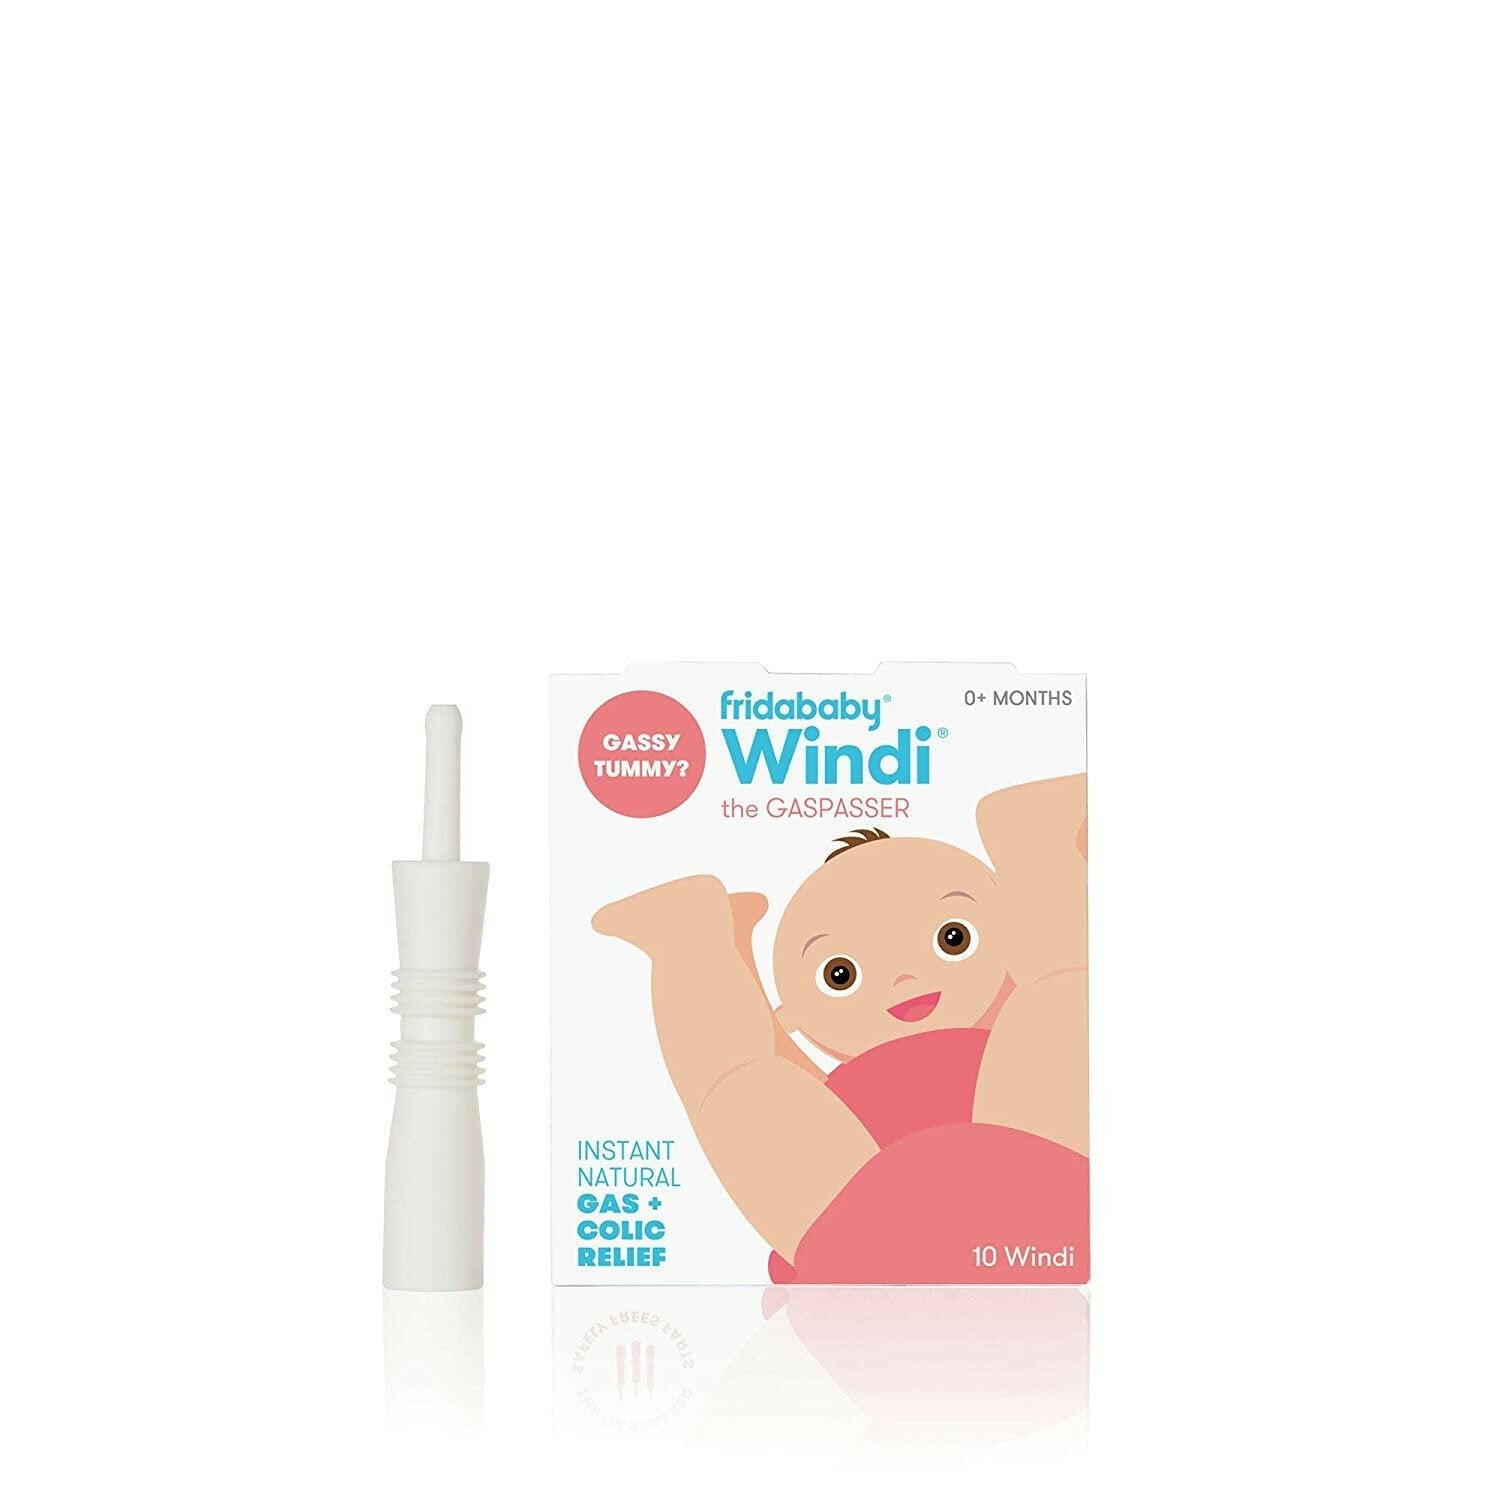 Fridababy Windi Gas and Colic Reliever - 10 Counts